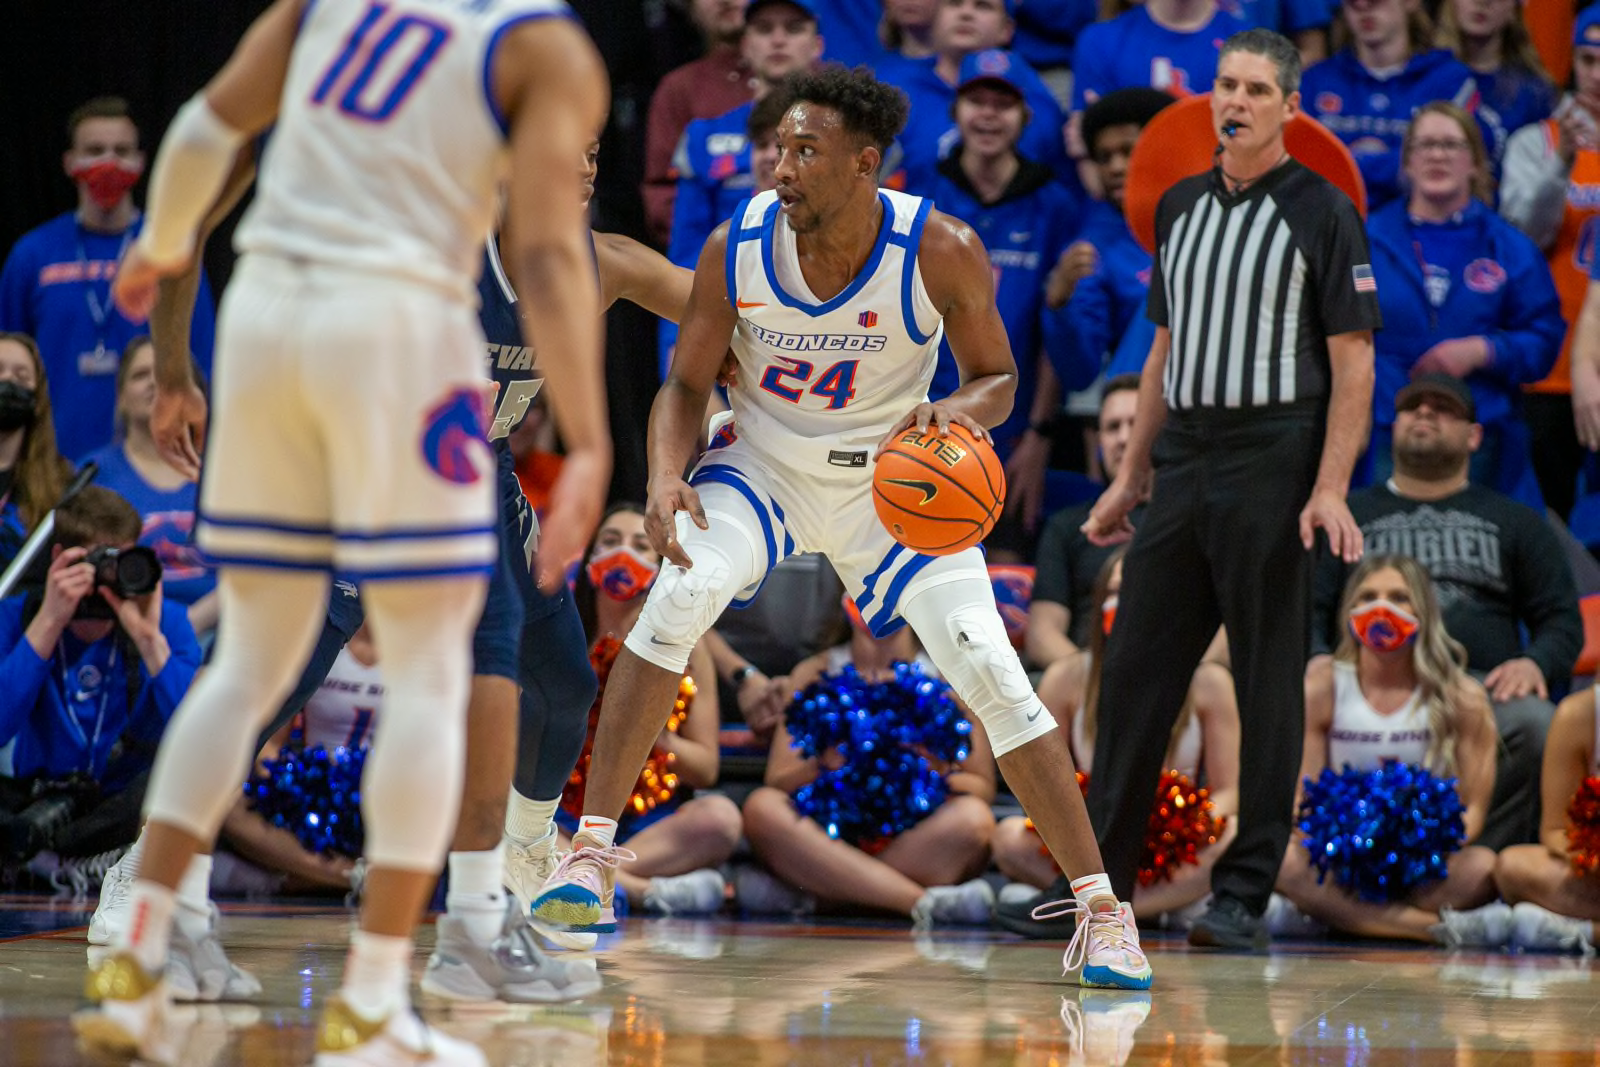 Boise State Basketball 3 keys to beat Memphis in 2022 NCAA Tournament